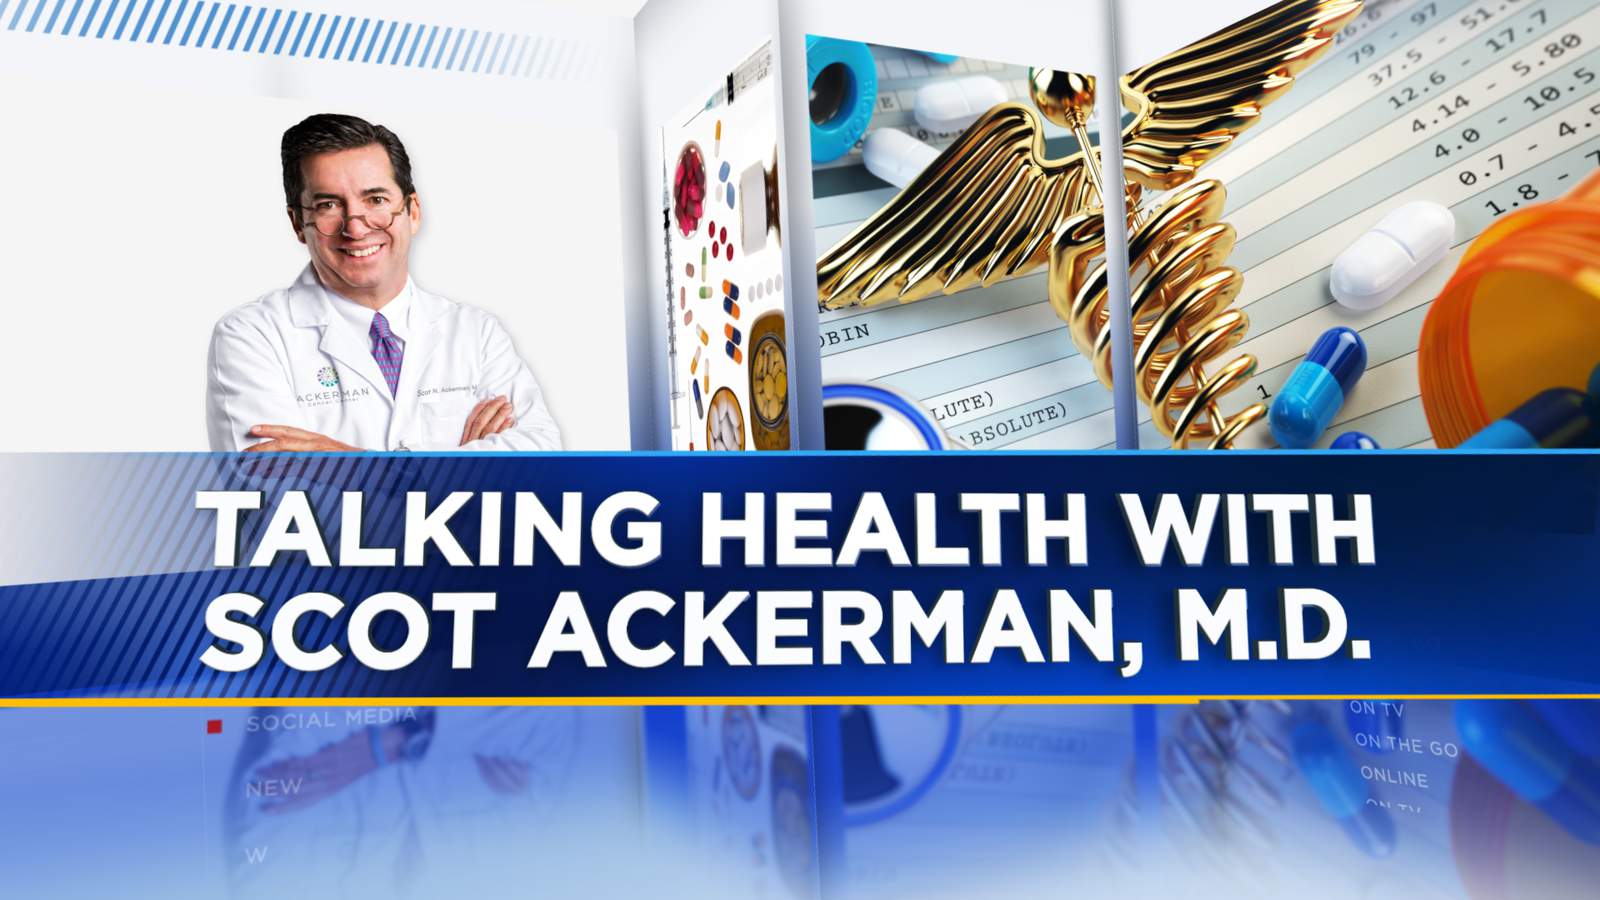 Share your health questions for Dr. Ackerman with us